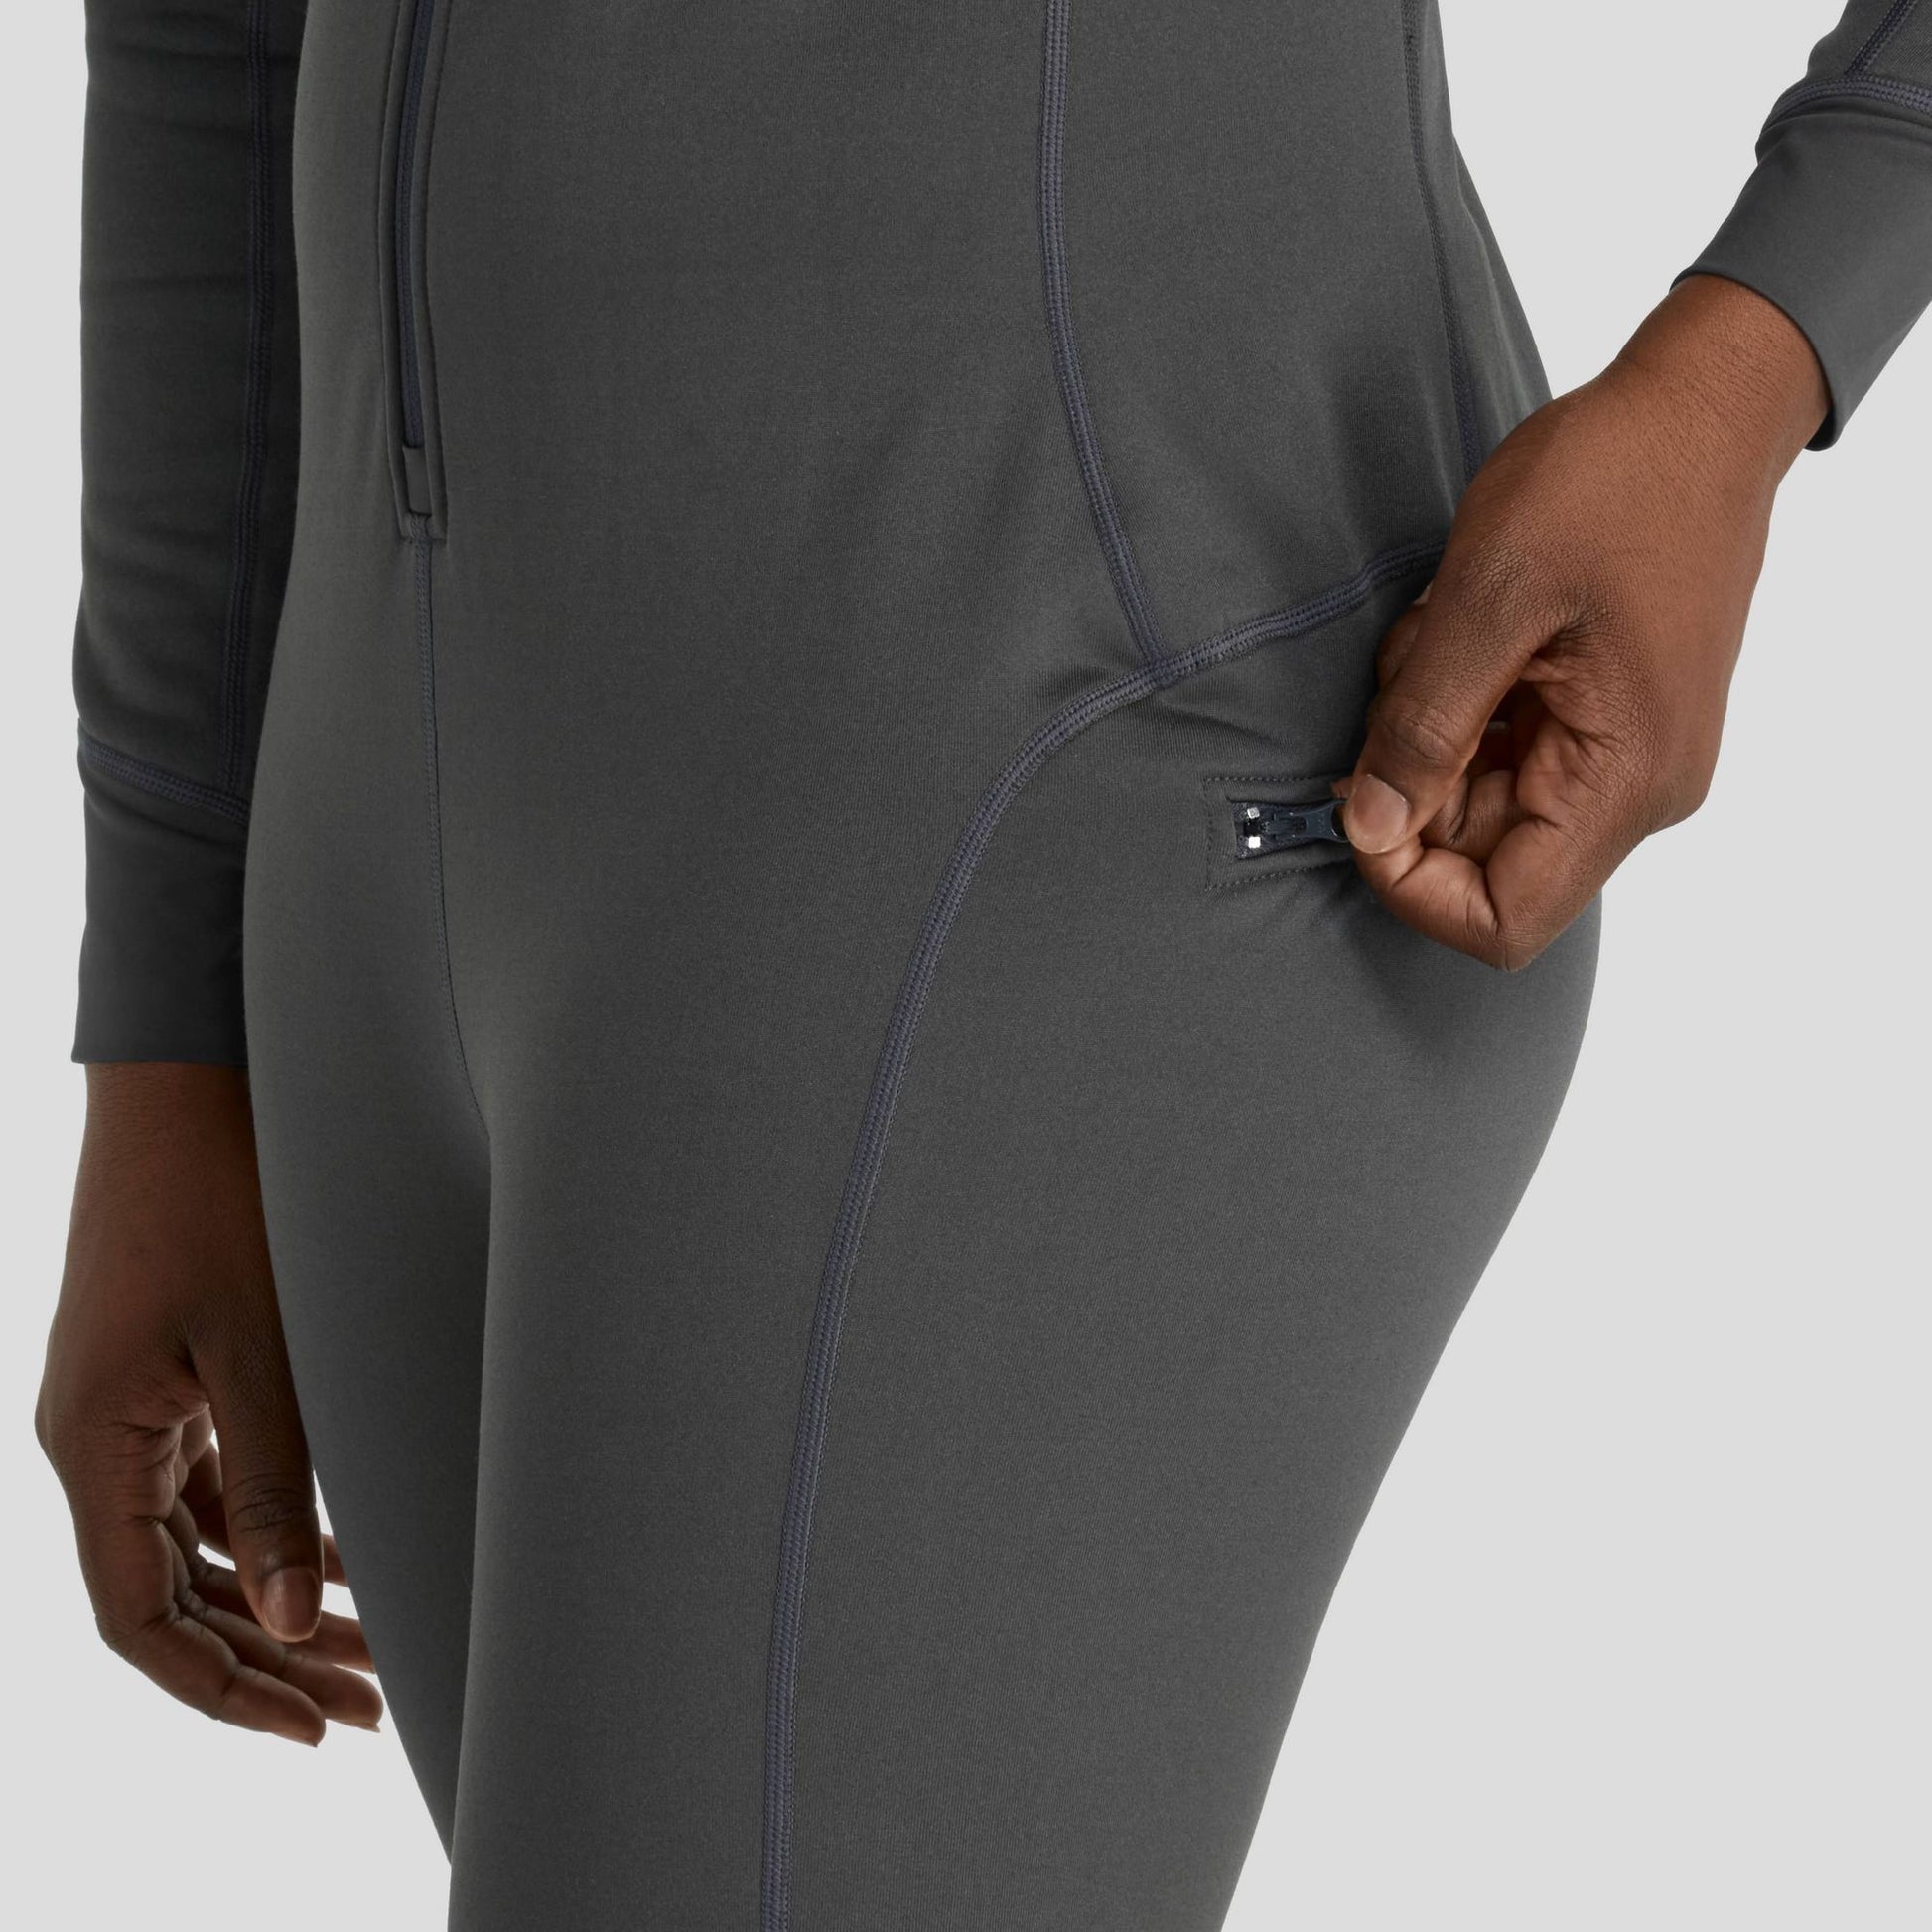 A cozy and comfortable NRS Expedition Union Suit - Women's in a grey sweatsuit with zippered pockets.